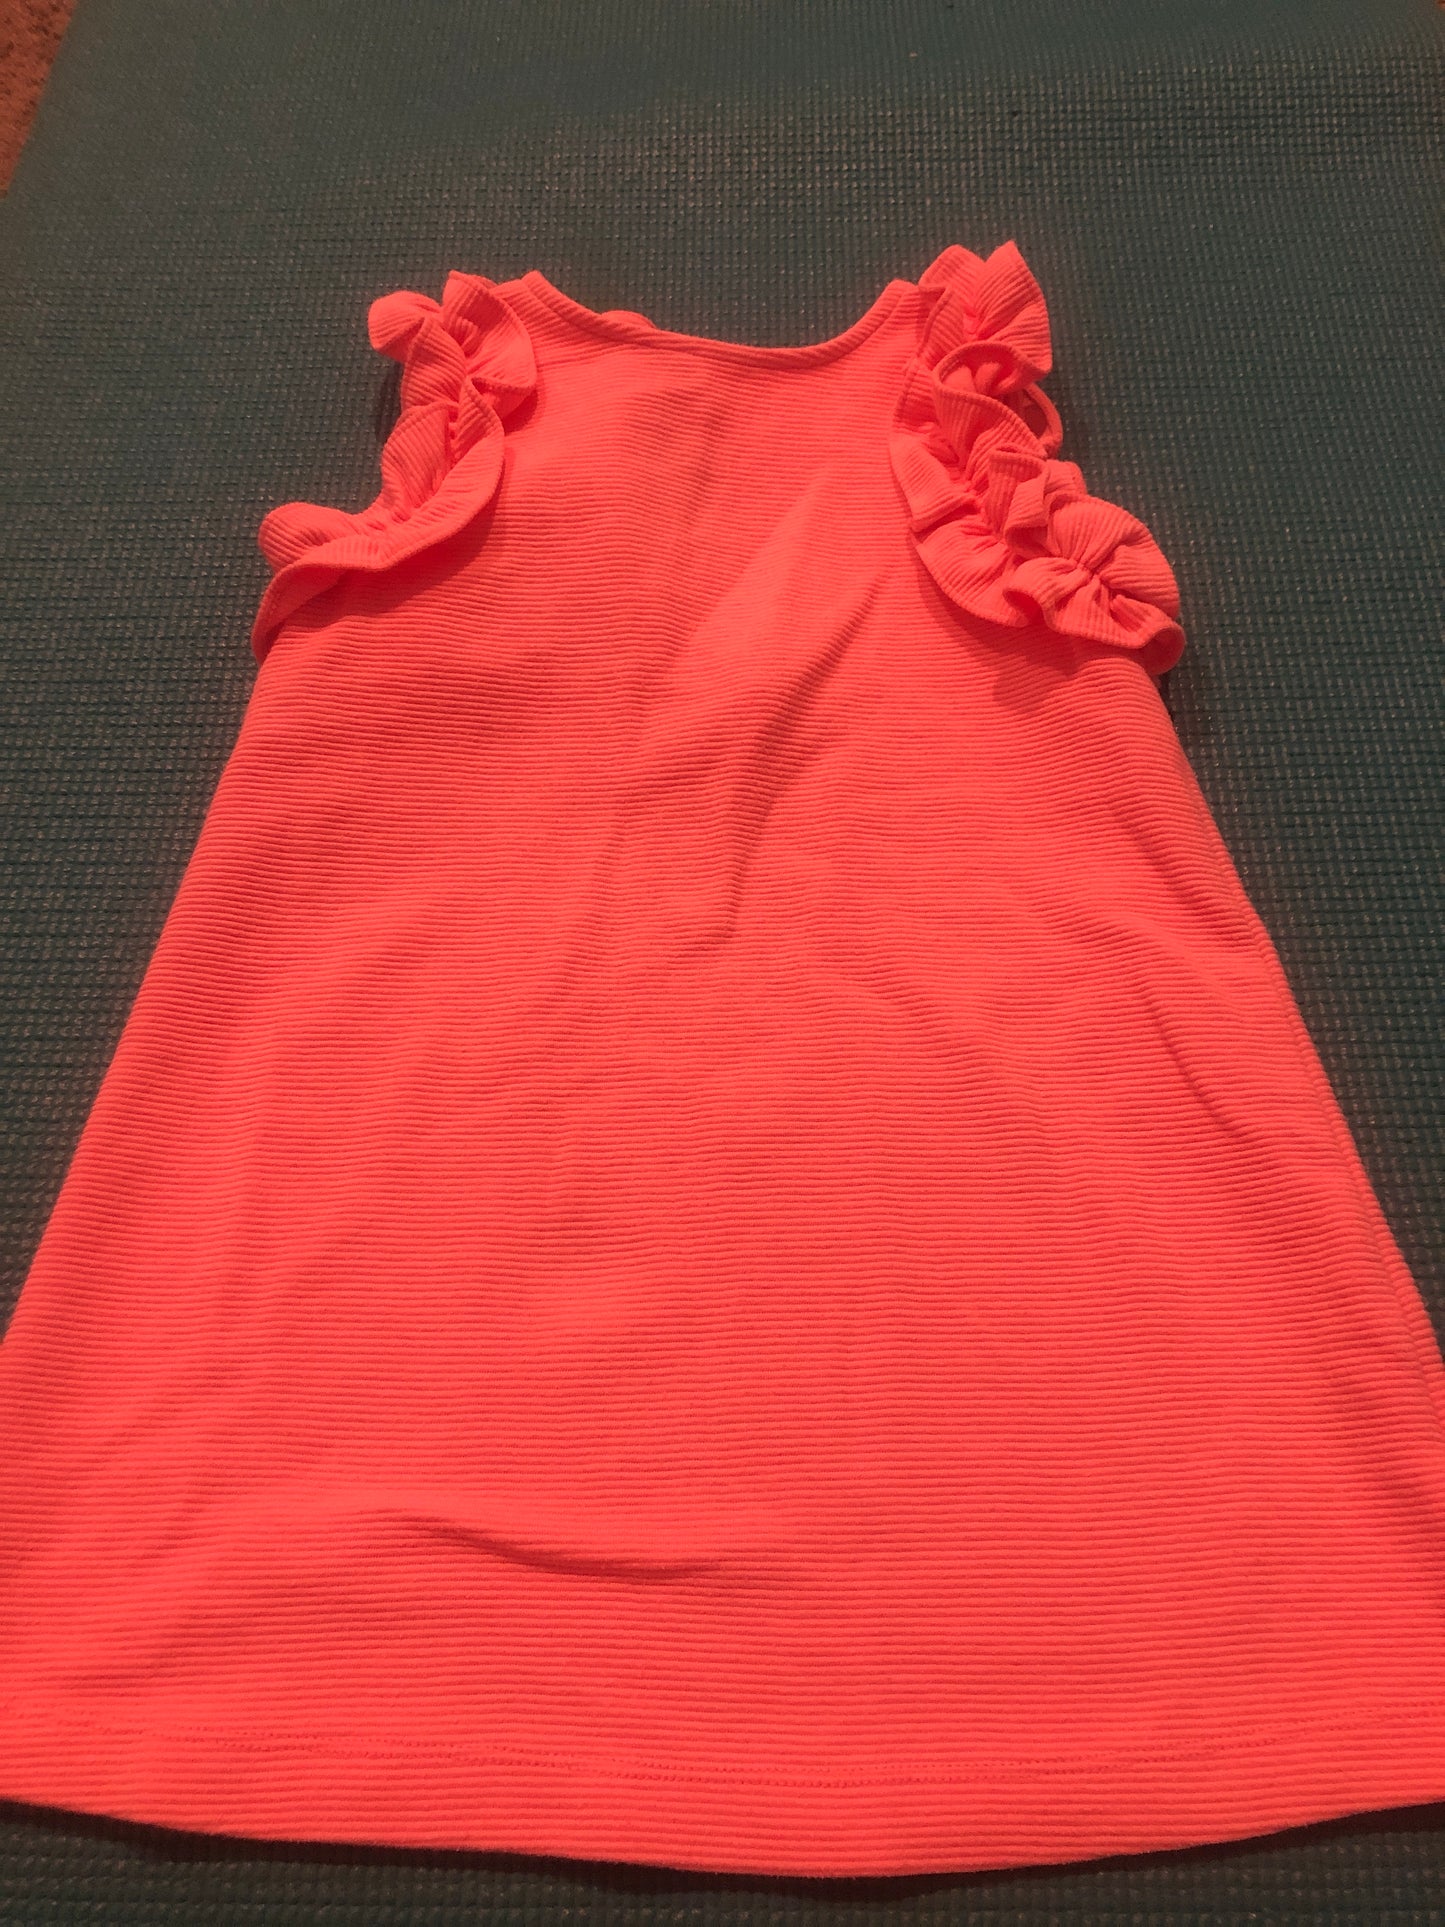 3T Janie and Jack pink ribbed dress